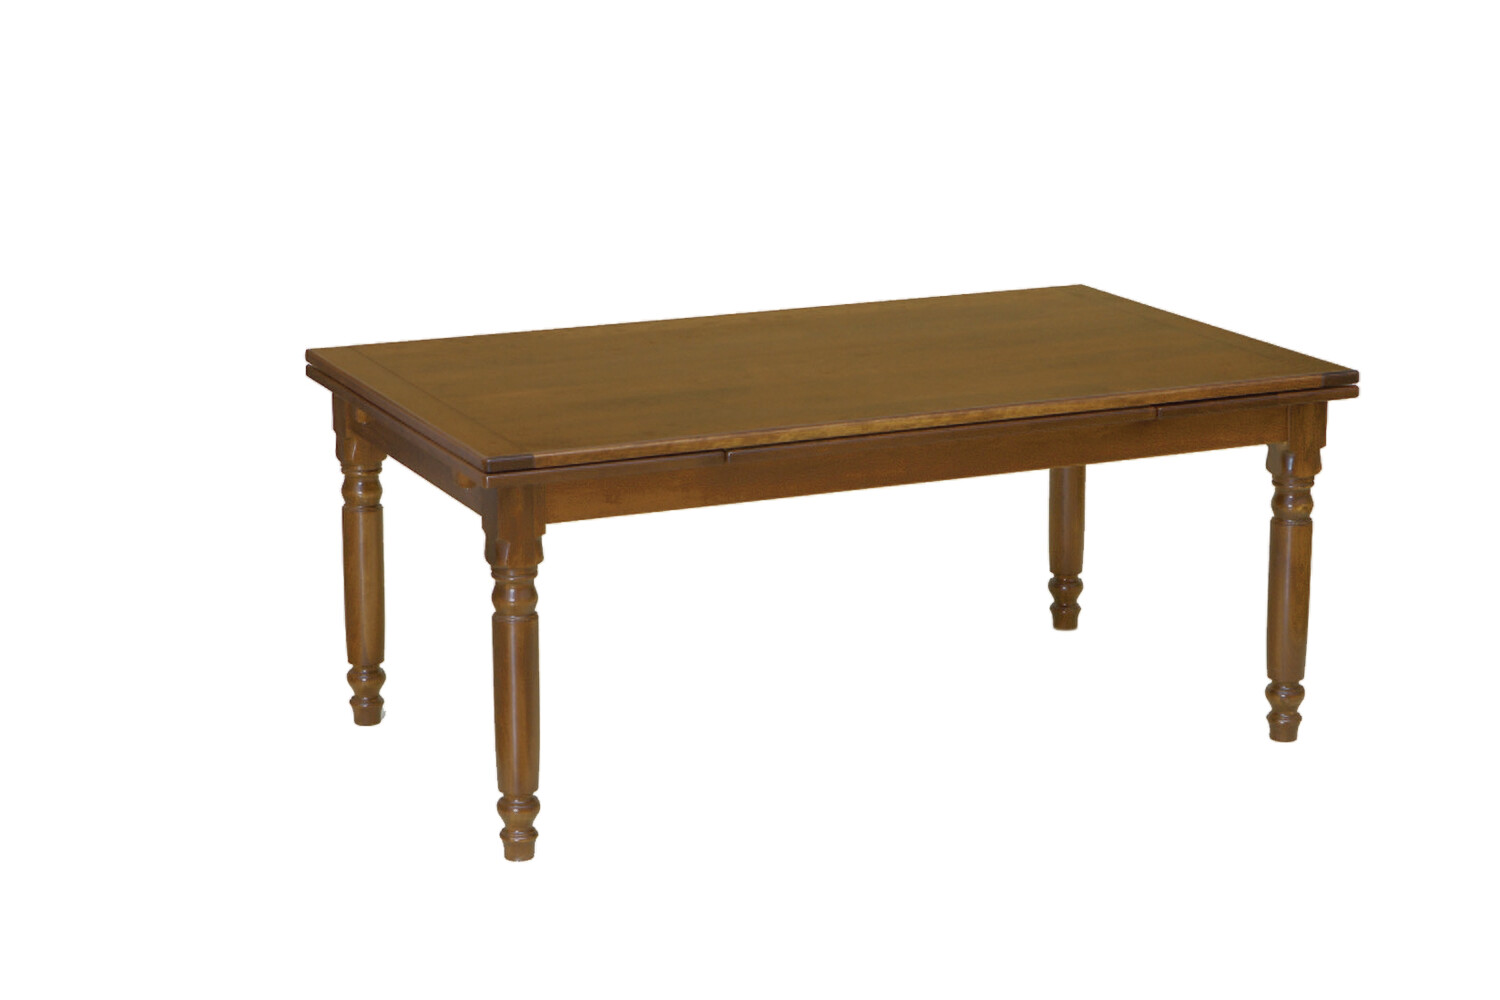 Provence Draw leaf Table